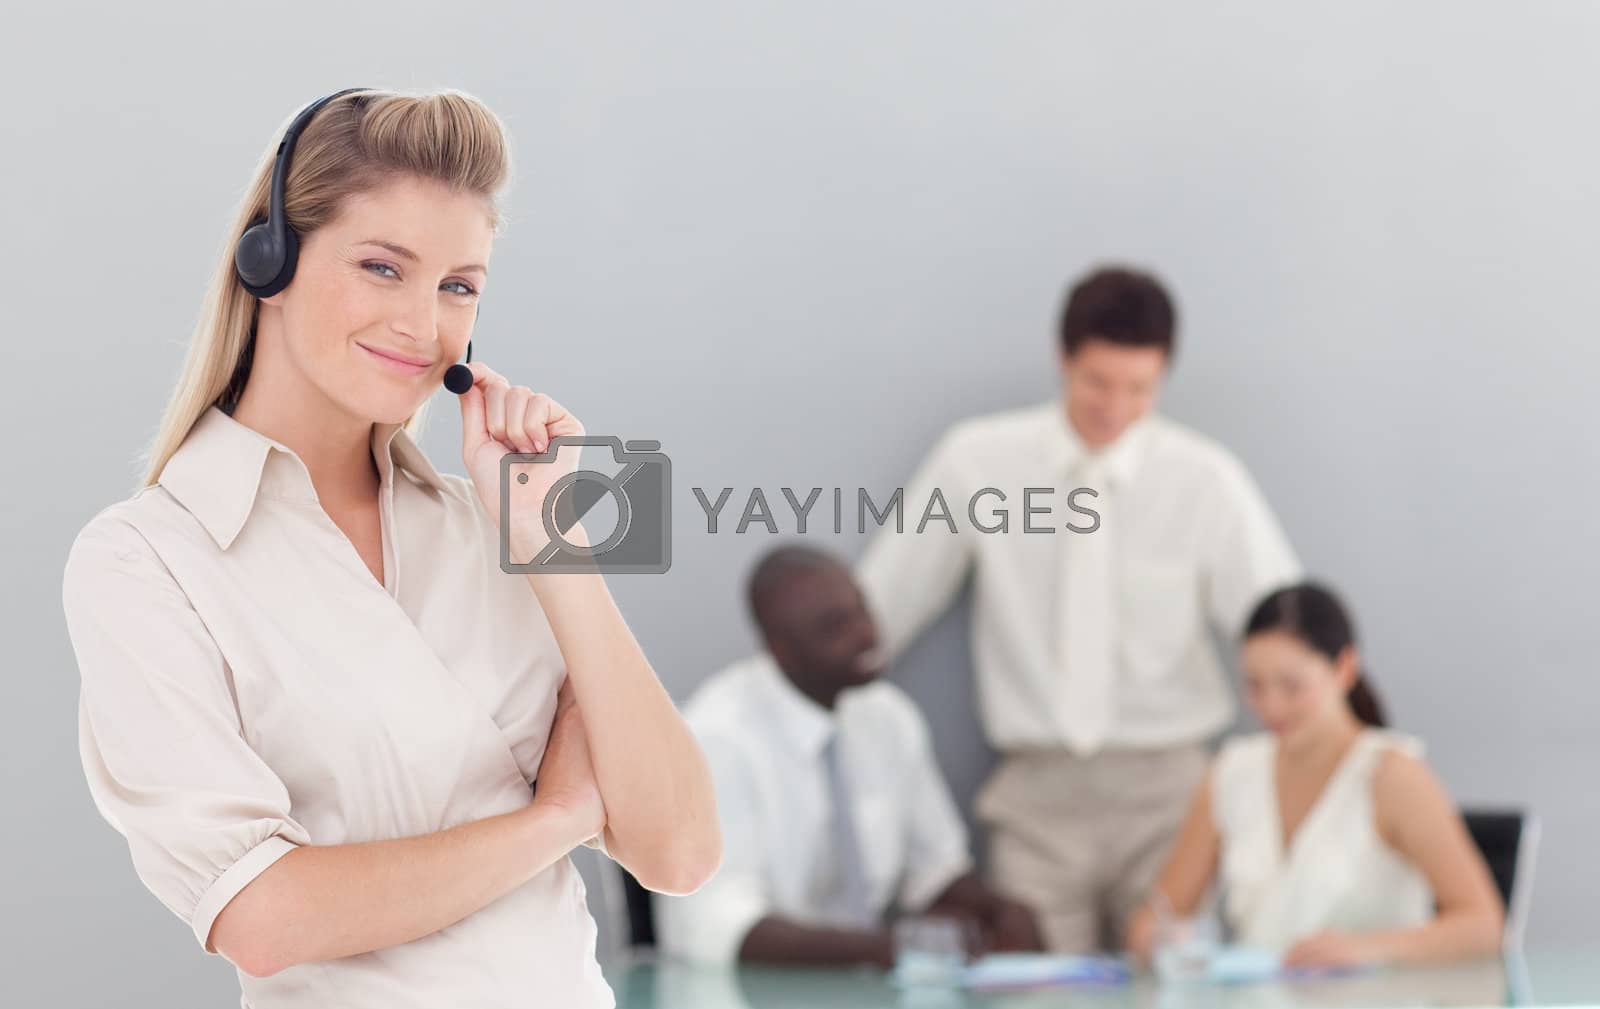 Royalty free image of Business team showing Spirit and expressing Positivity by Wavebreakmedia